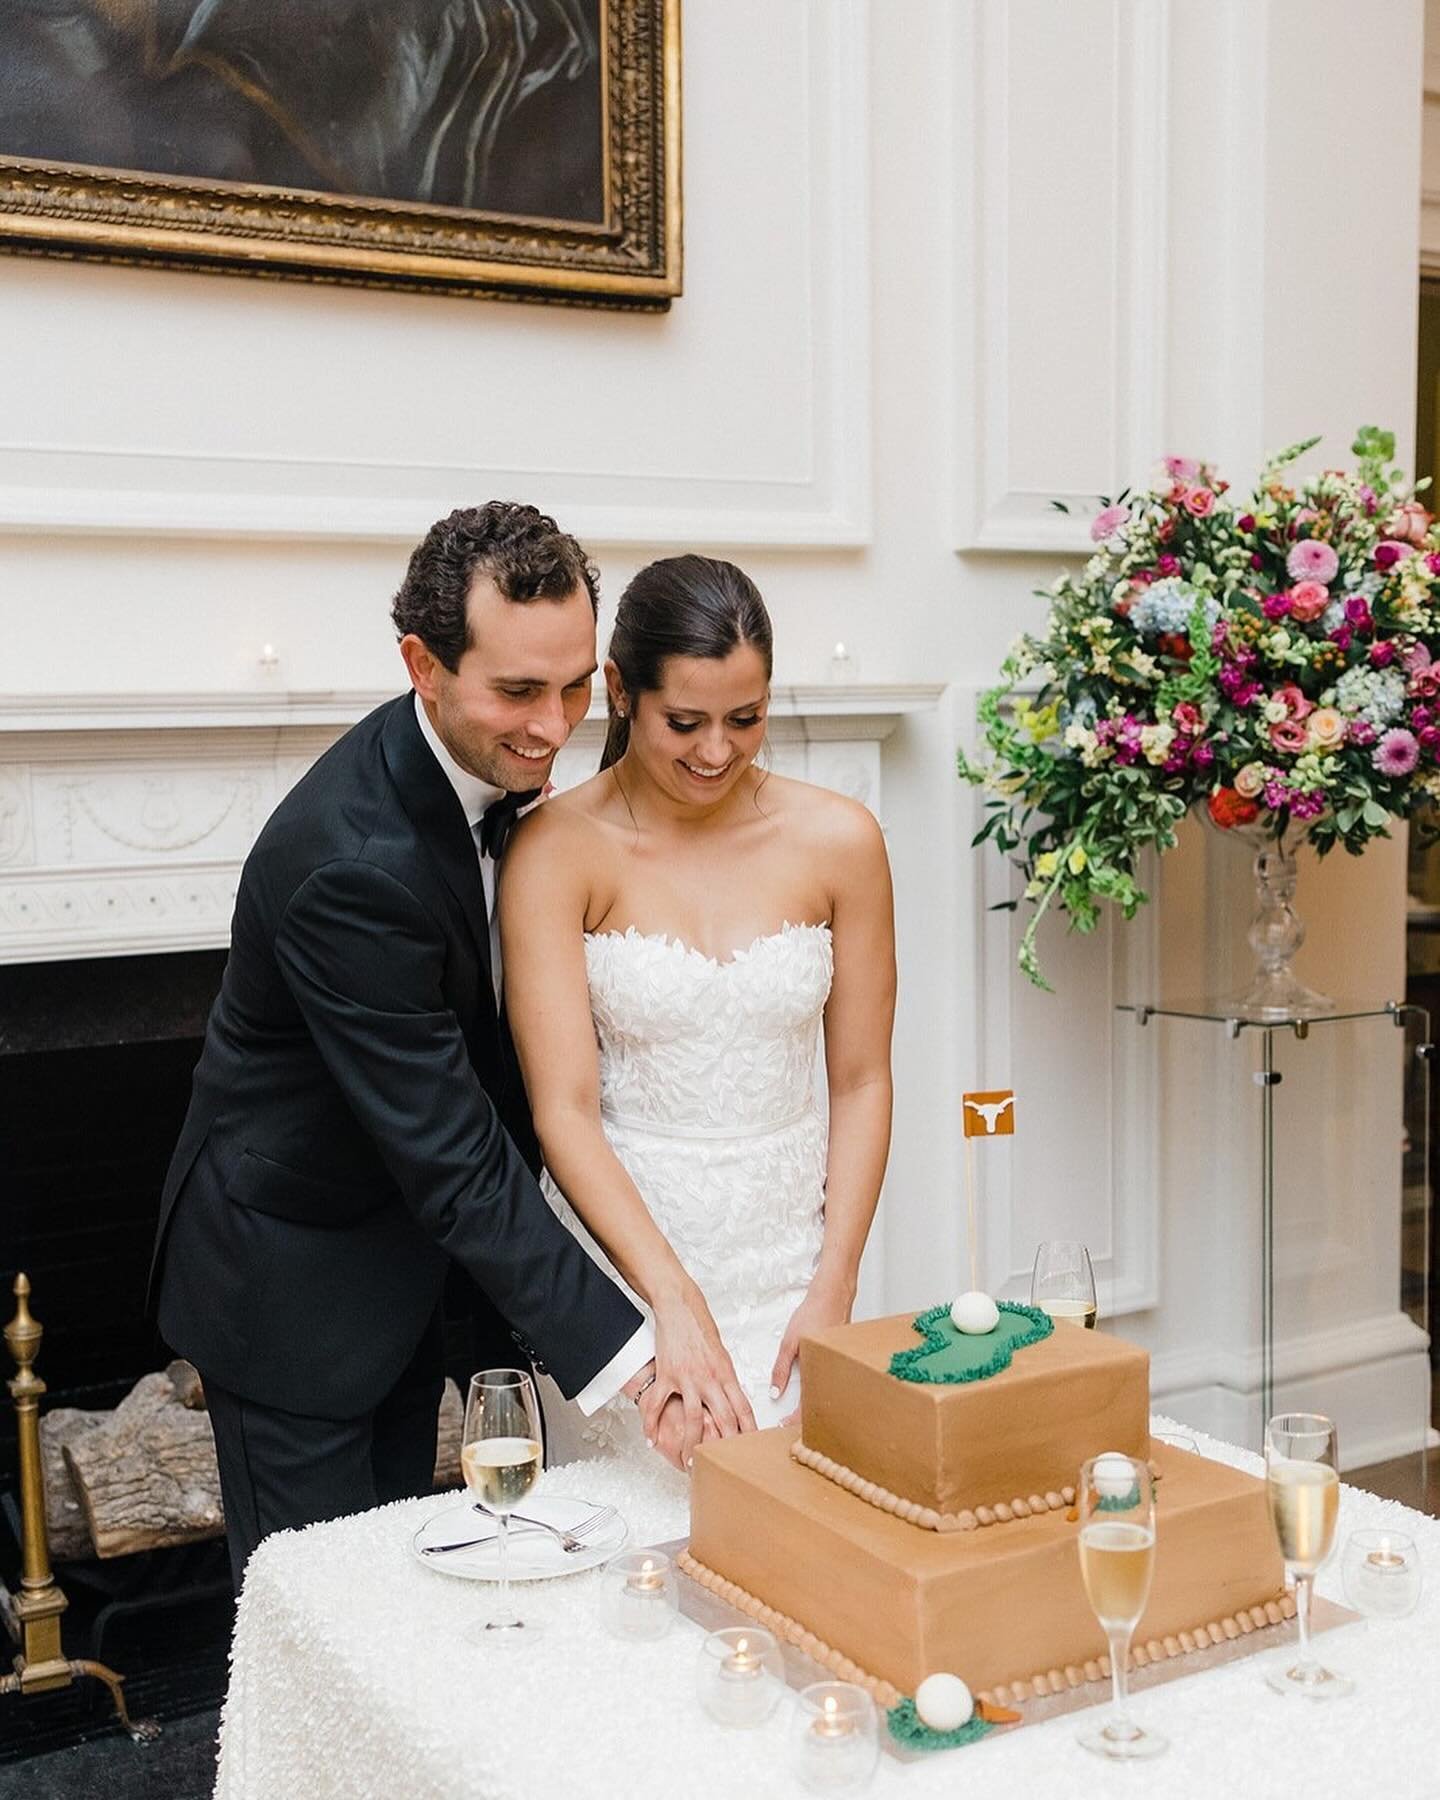 How are we gearing up for a Masters weekend full of pimento cheese sandwiches and azaleas? By reminiscing on some of our favorite golf moments at weddings, of course!